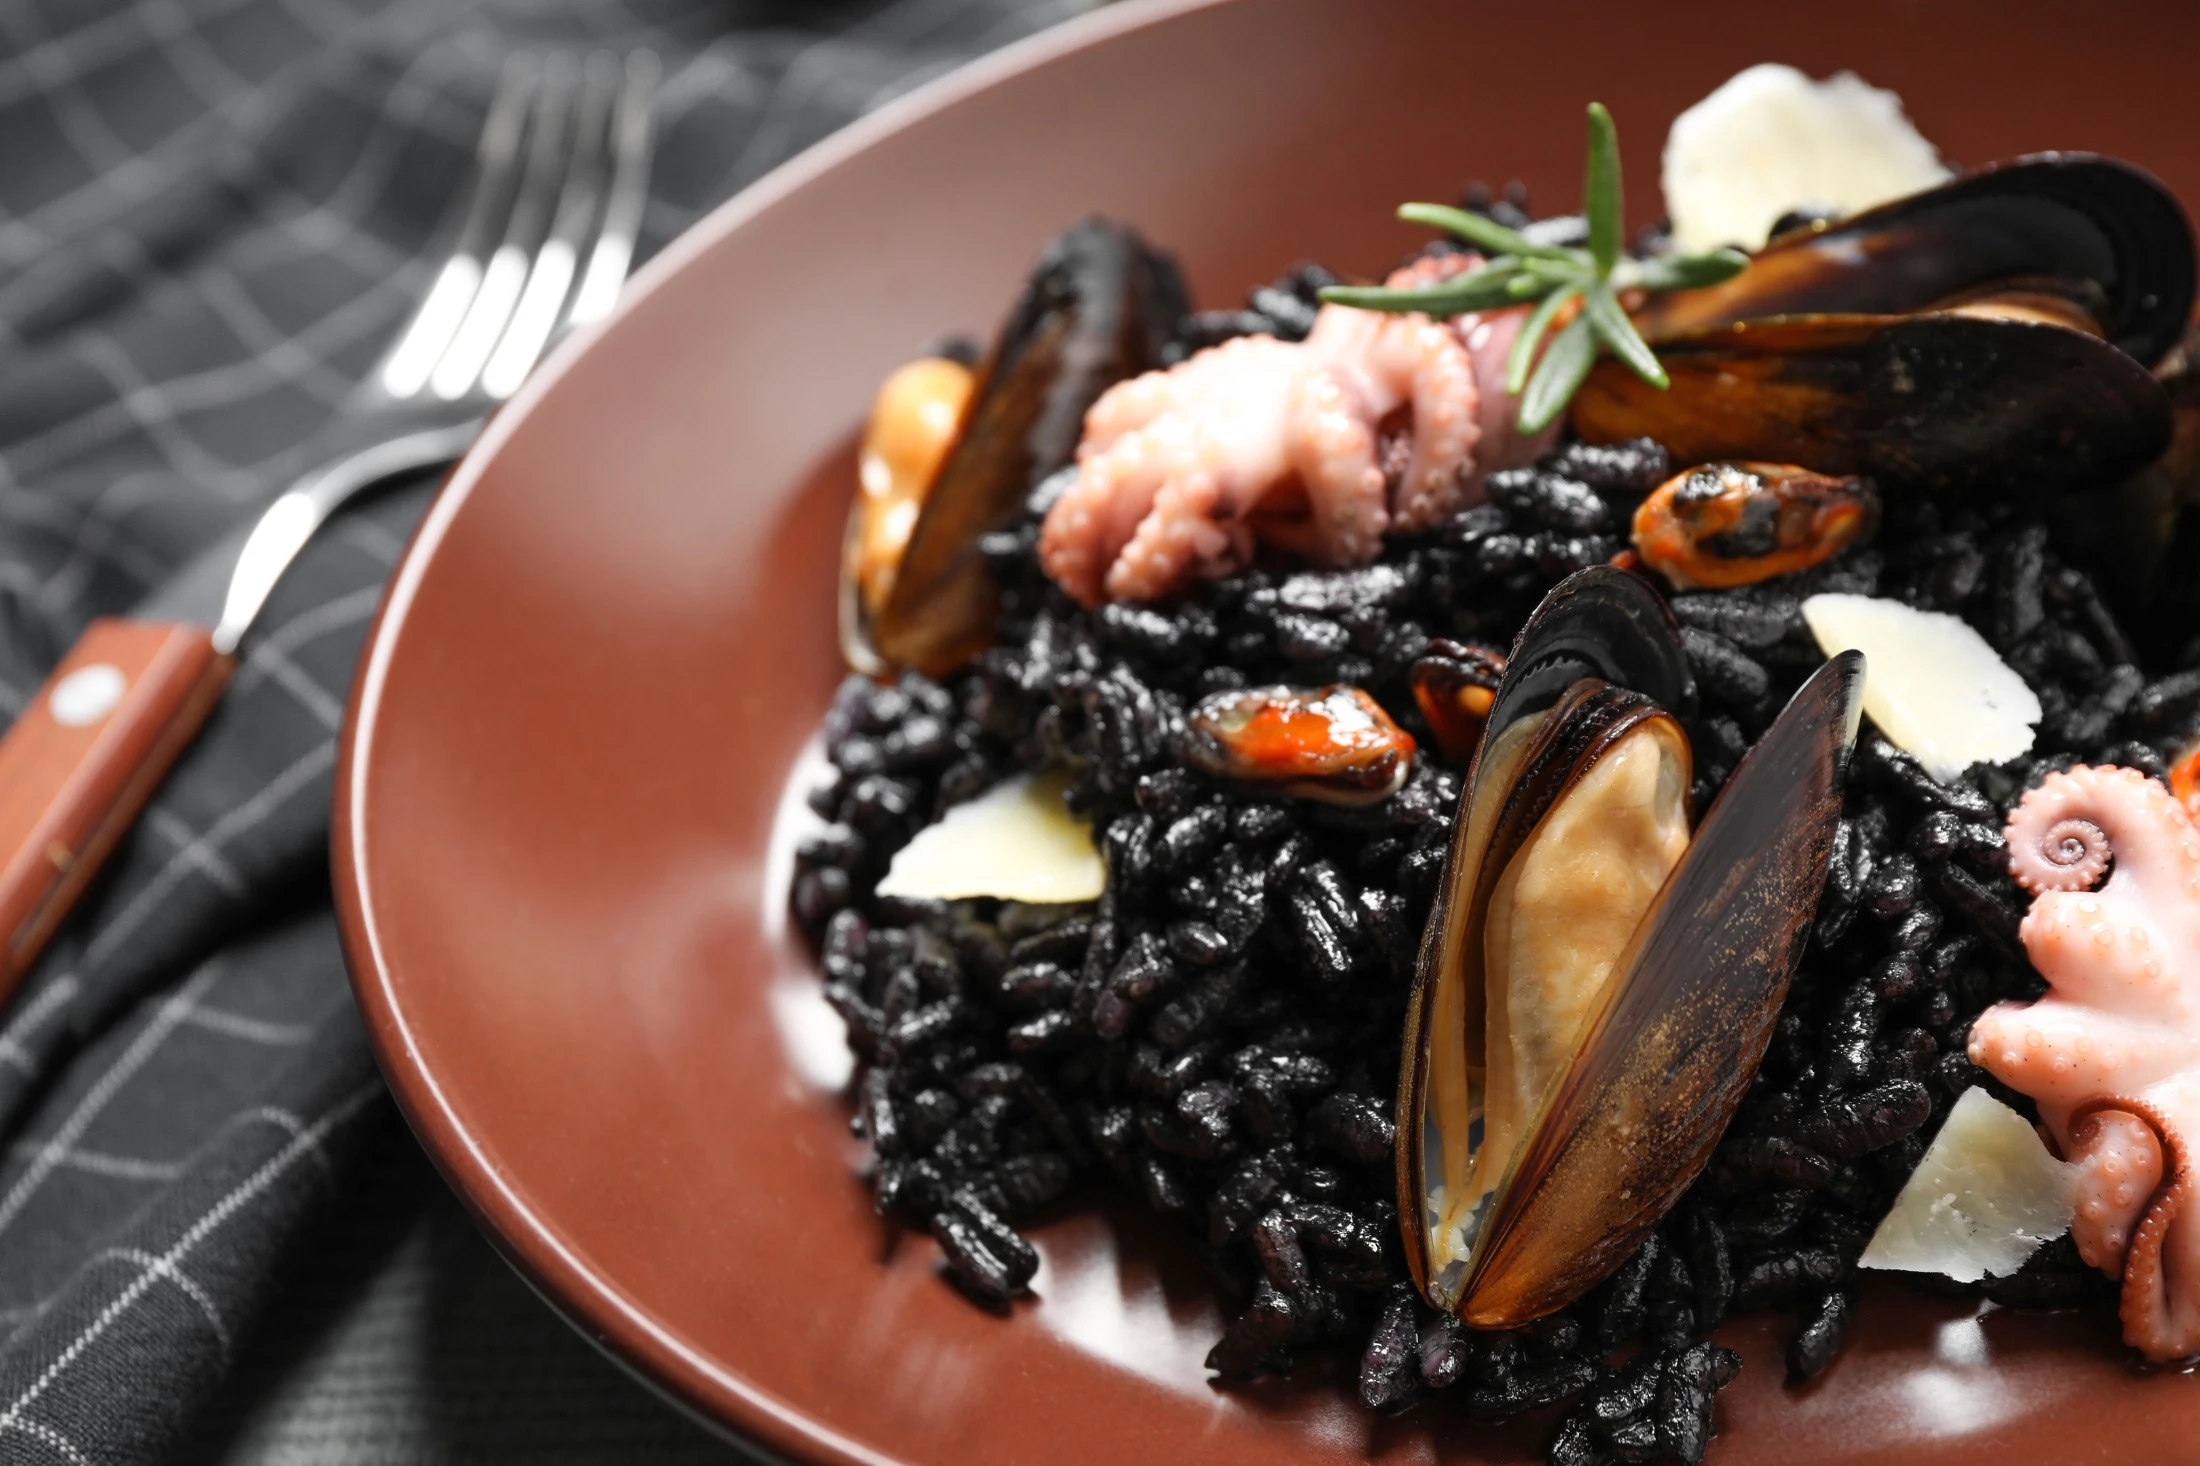 A plate of black risotto with cuttlefish ink, served with seafood.  